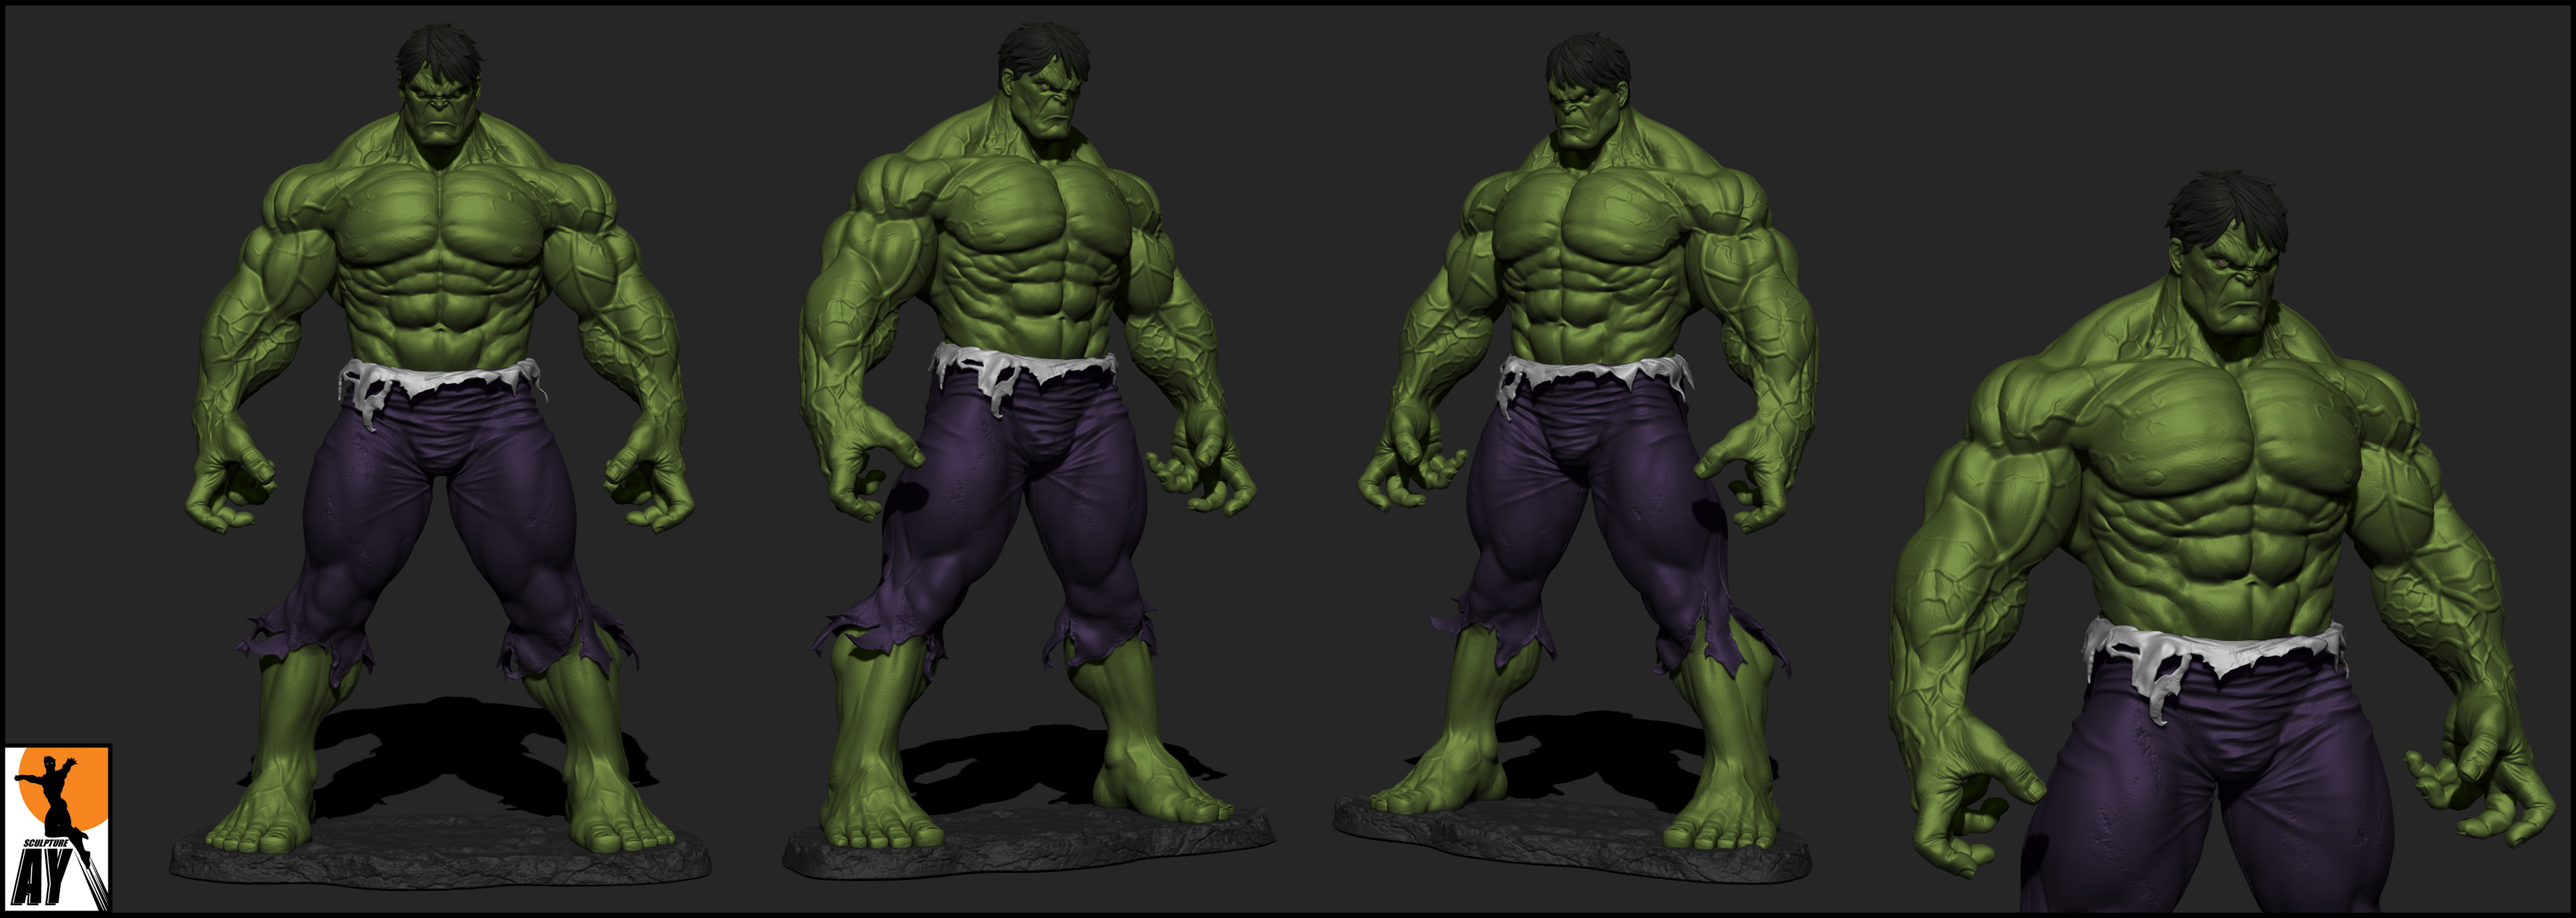 3822x1362 The Incredible Hulk by AYsculpture